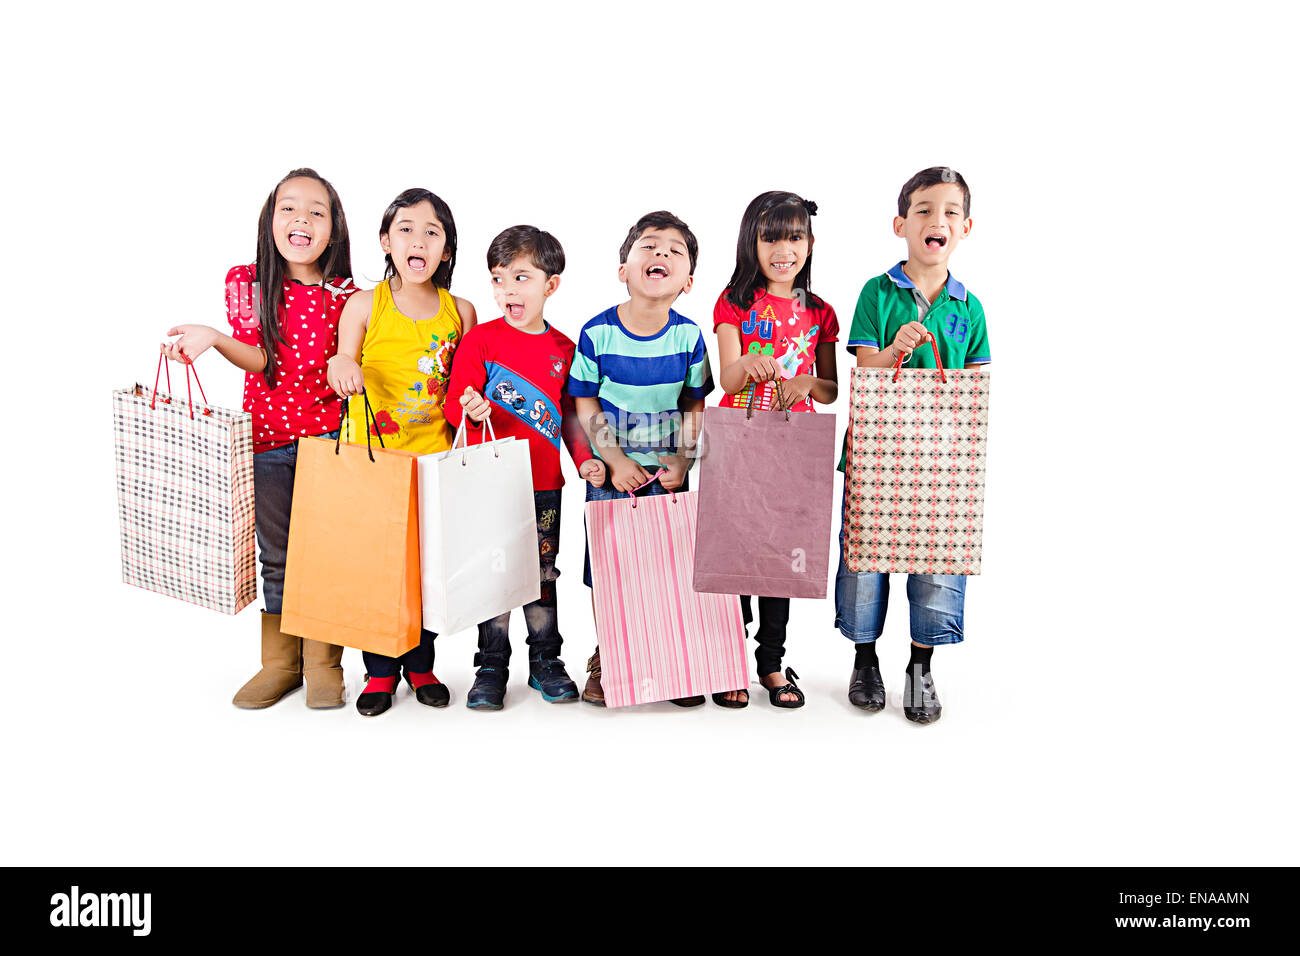 indian Kids groups Friends Bag Shopping Stock Photo